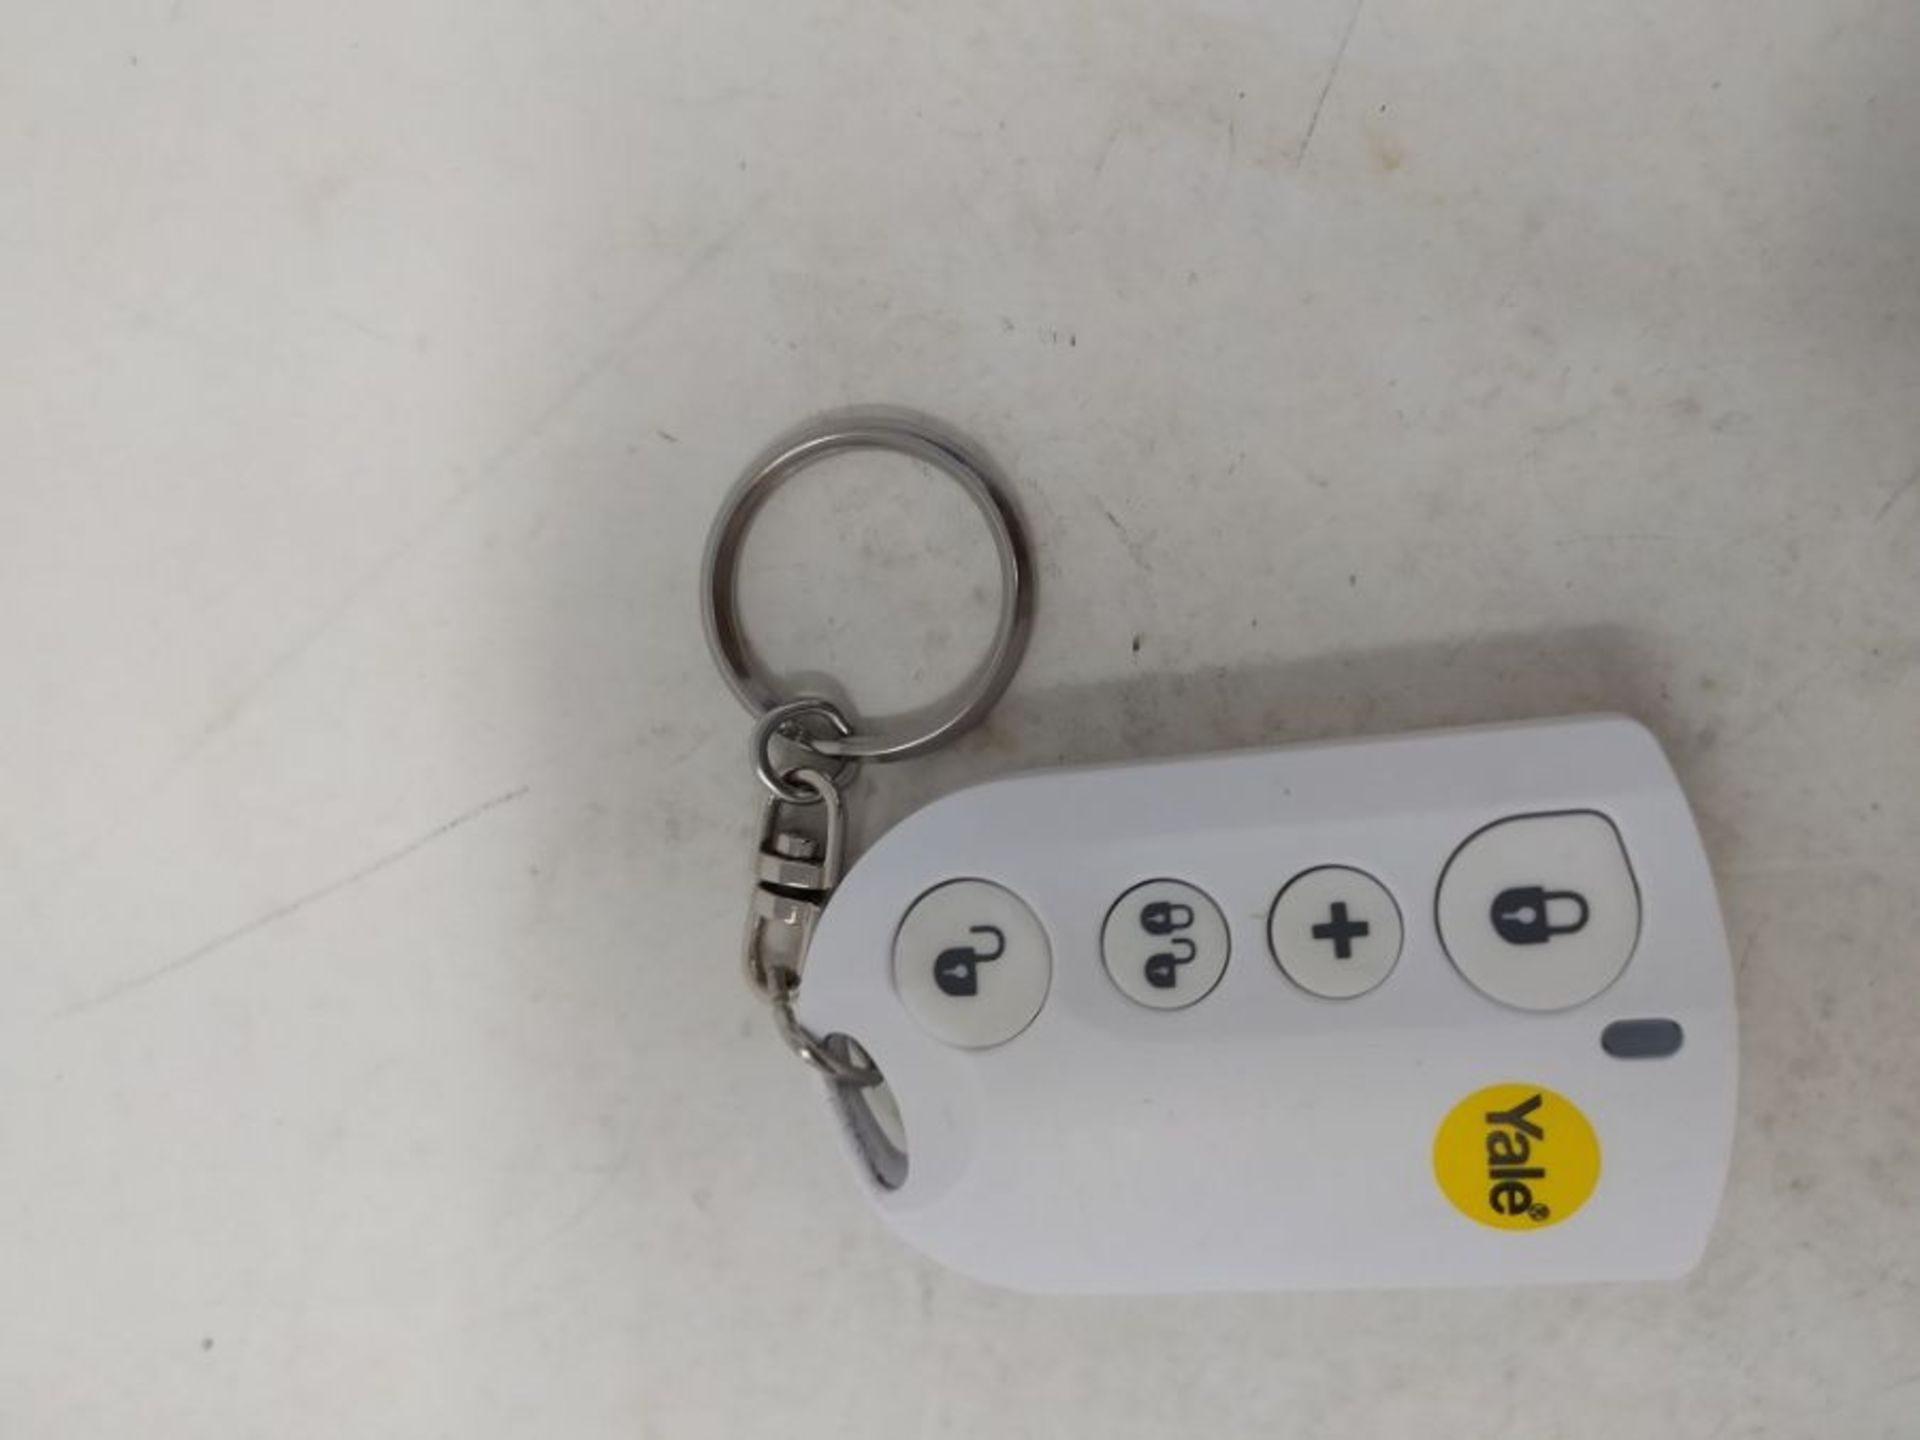 Yale B-HSA6060 Alarm Accessory Remote Keyfob, Works with HSA Alarms Including YES-ALAR - Image 2 of 2